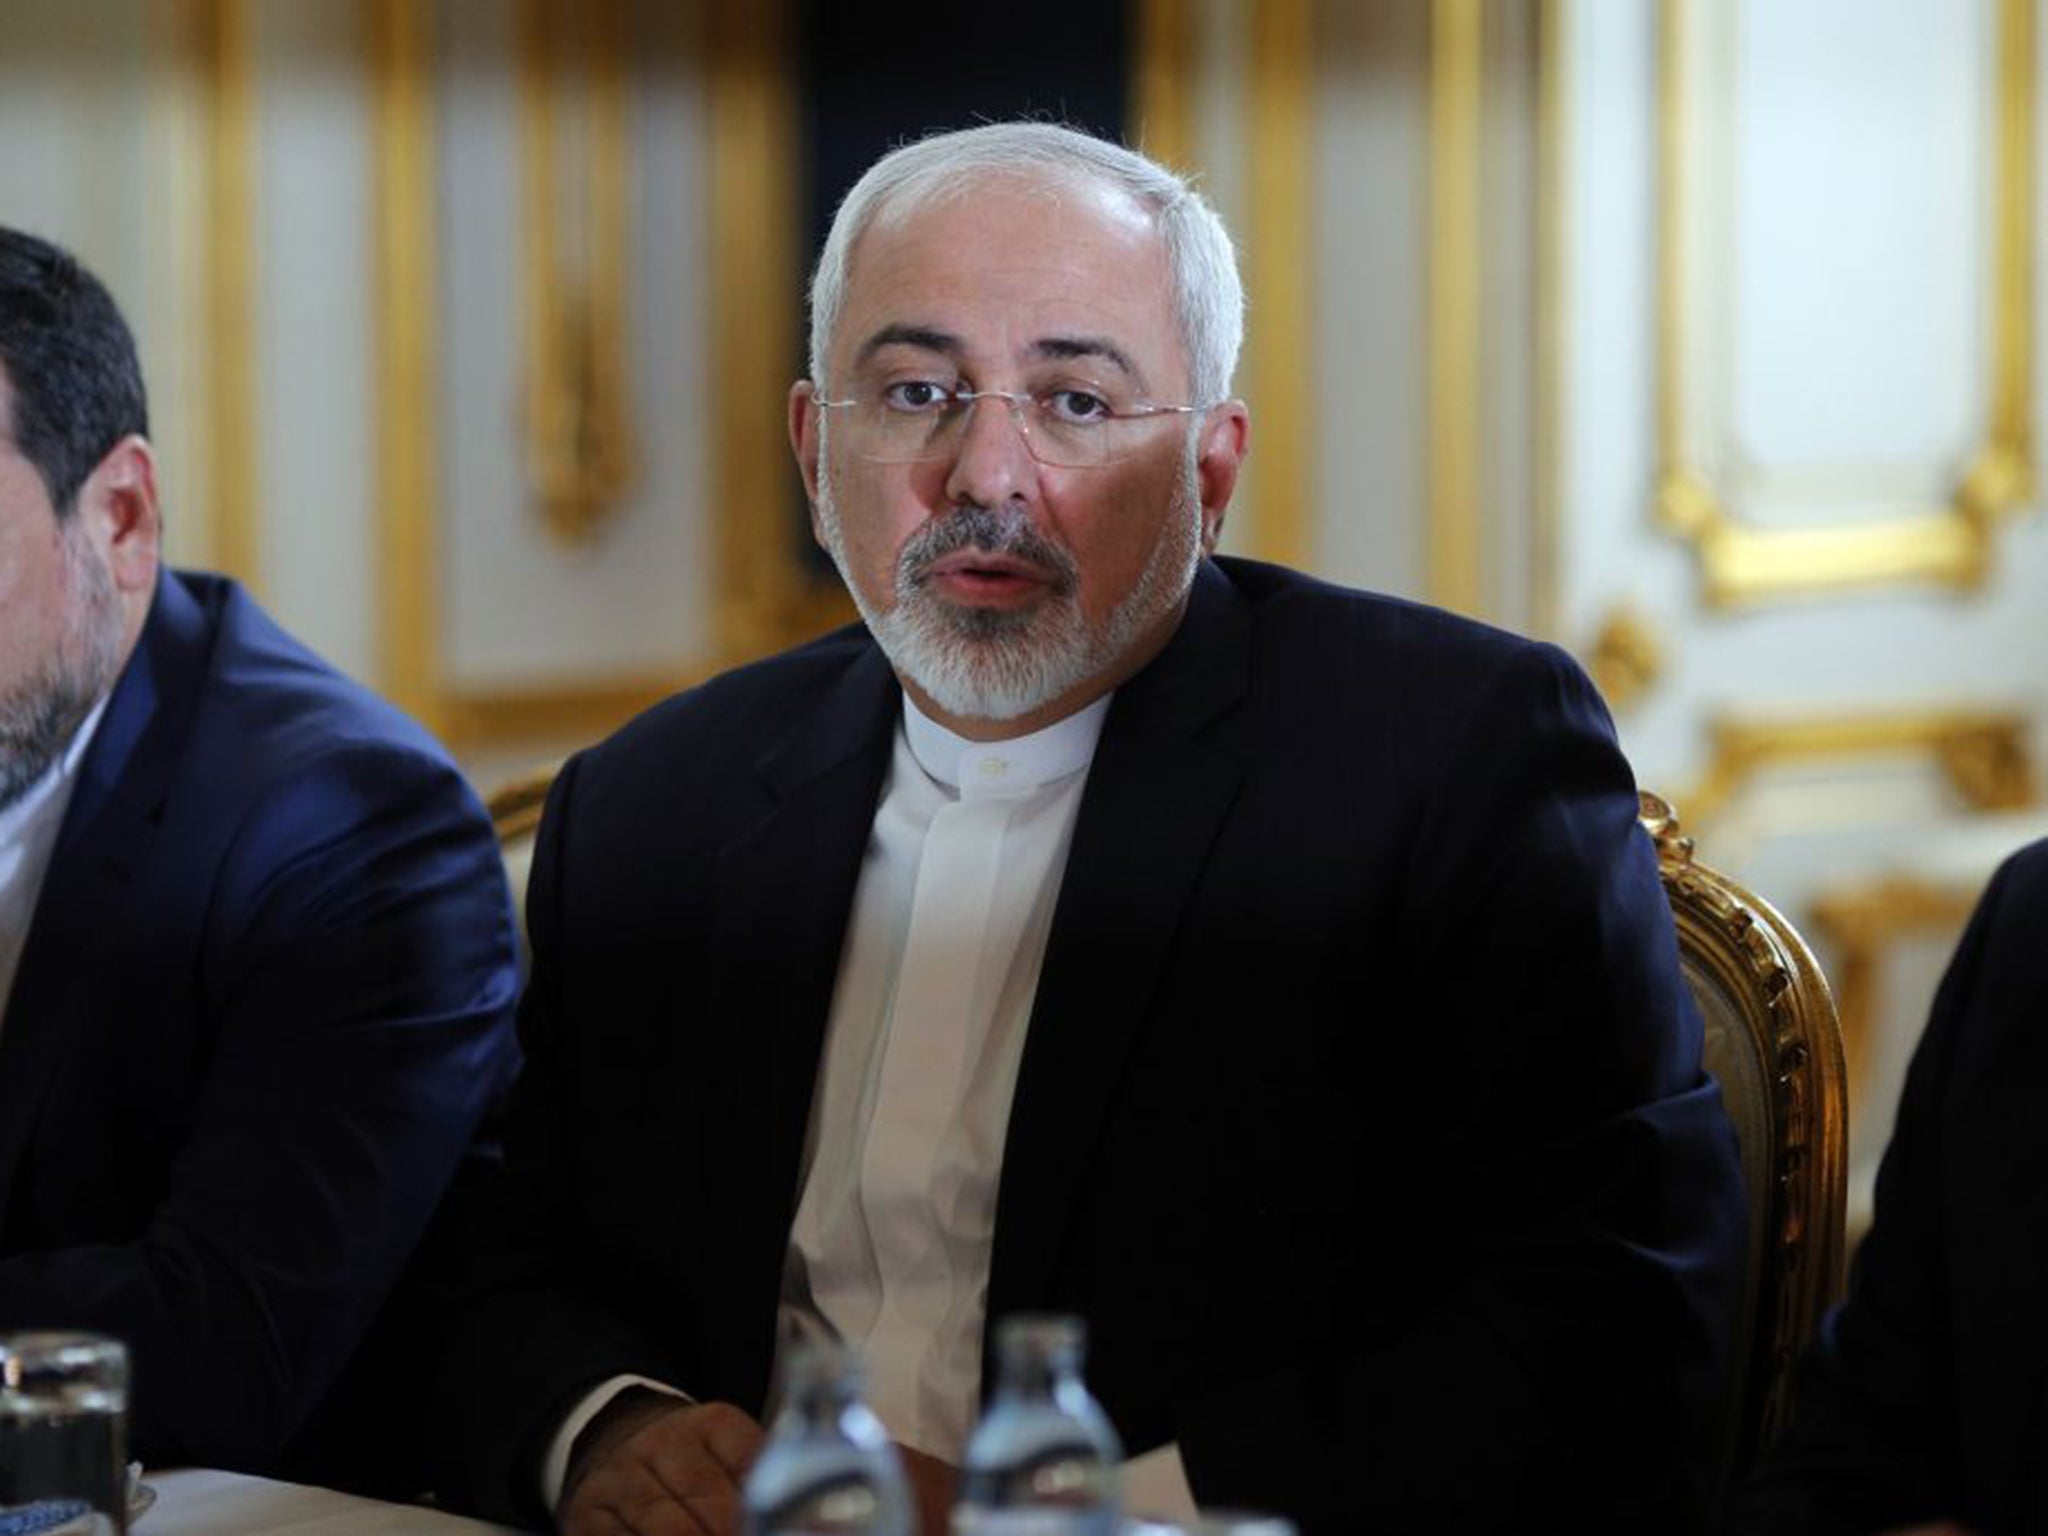 Iran’s Mohammad Javad Zarif has said that Iran would reach a nuclear deal with world powers as long as the other side did not make excessive demands (